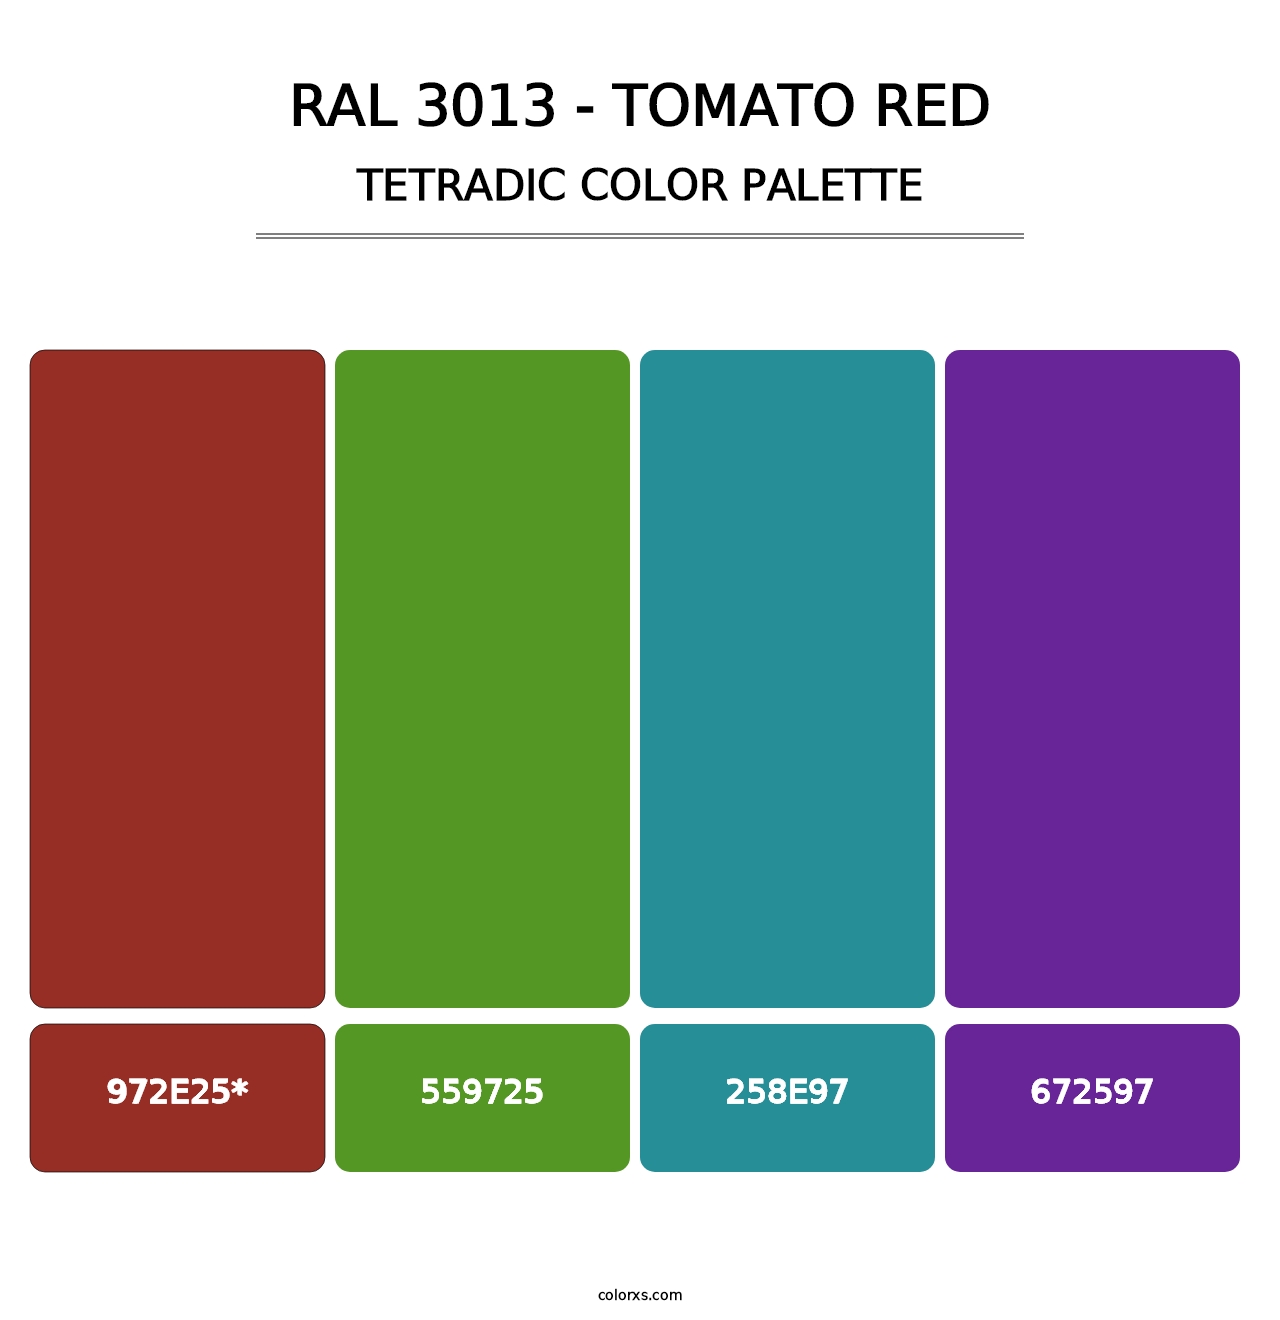 RAL 3013 - Tomato Red - Tetradic Color Palette